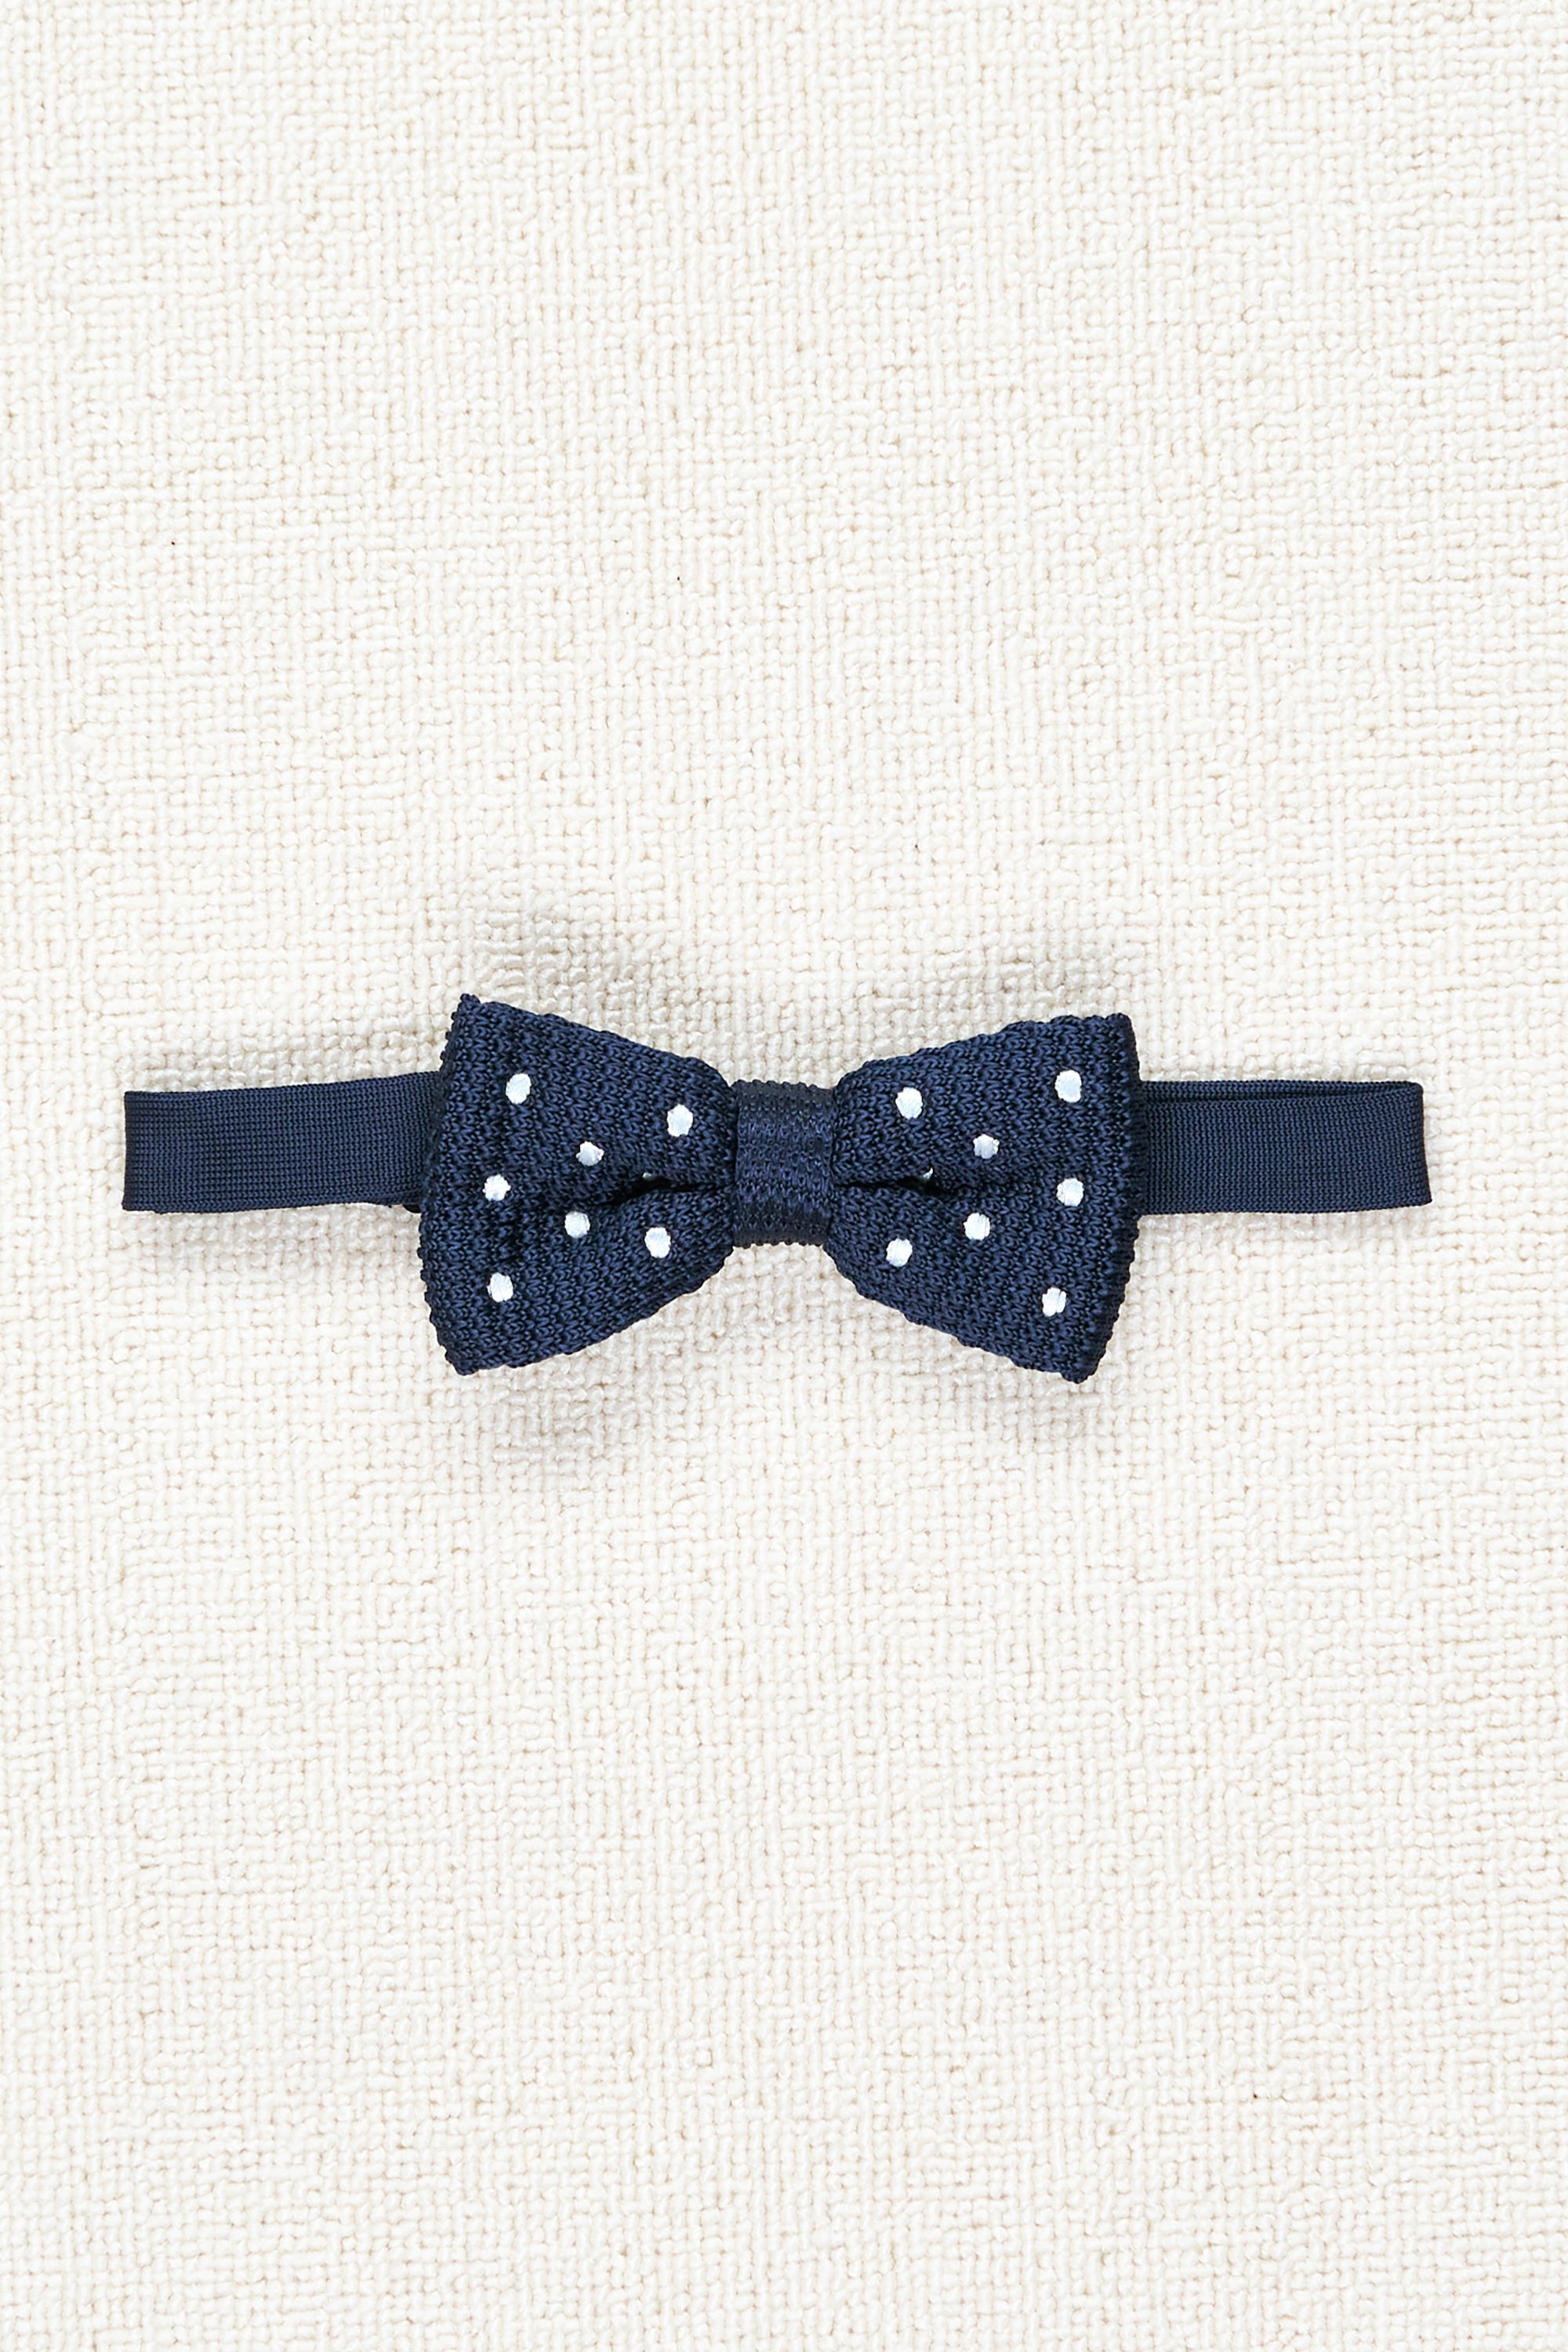 The Armoury Navy with White Dot Silk Knit Bowtie *sample*